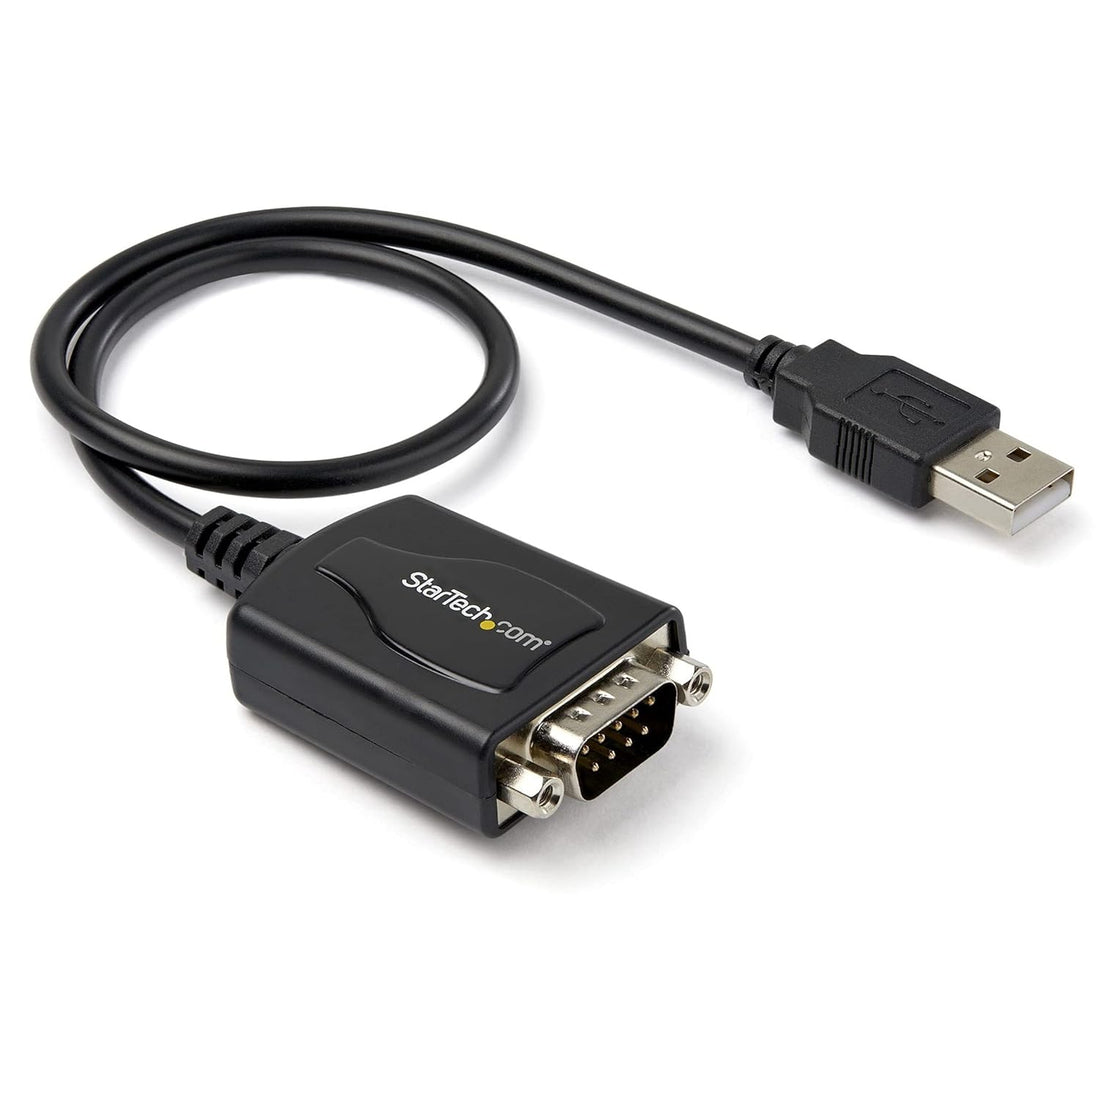 1x USB to Serial Adapter Cable